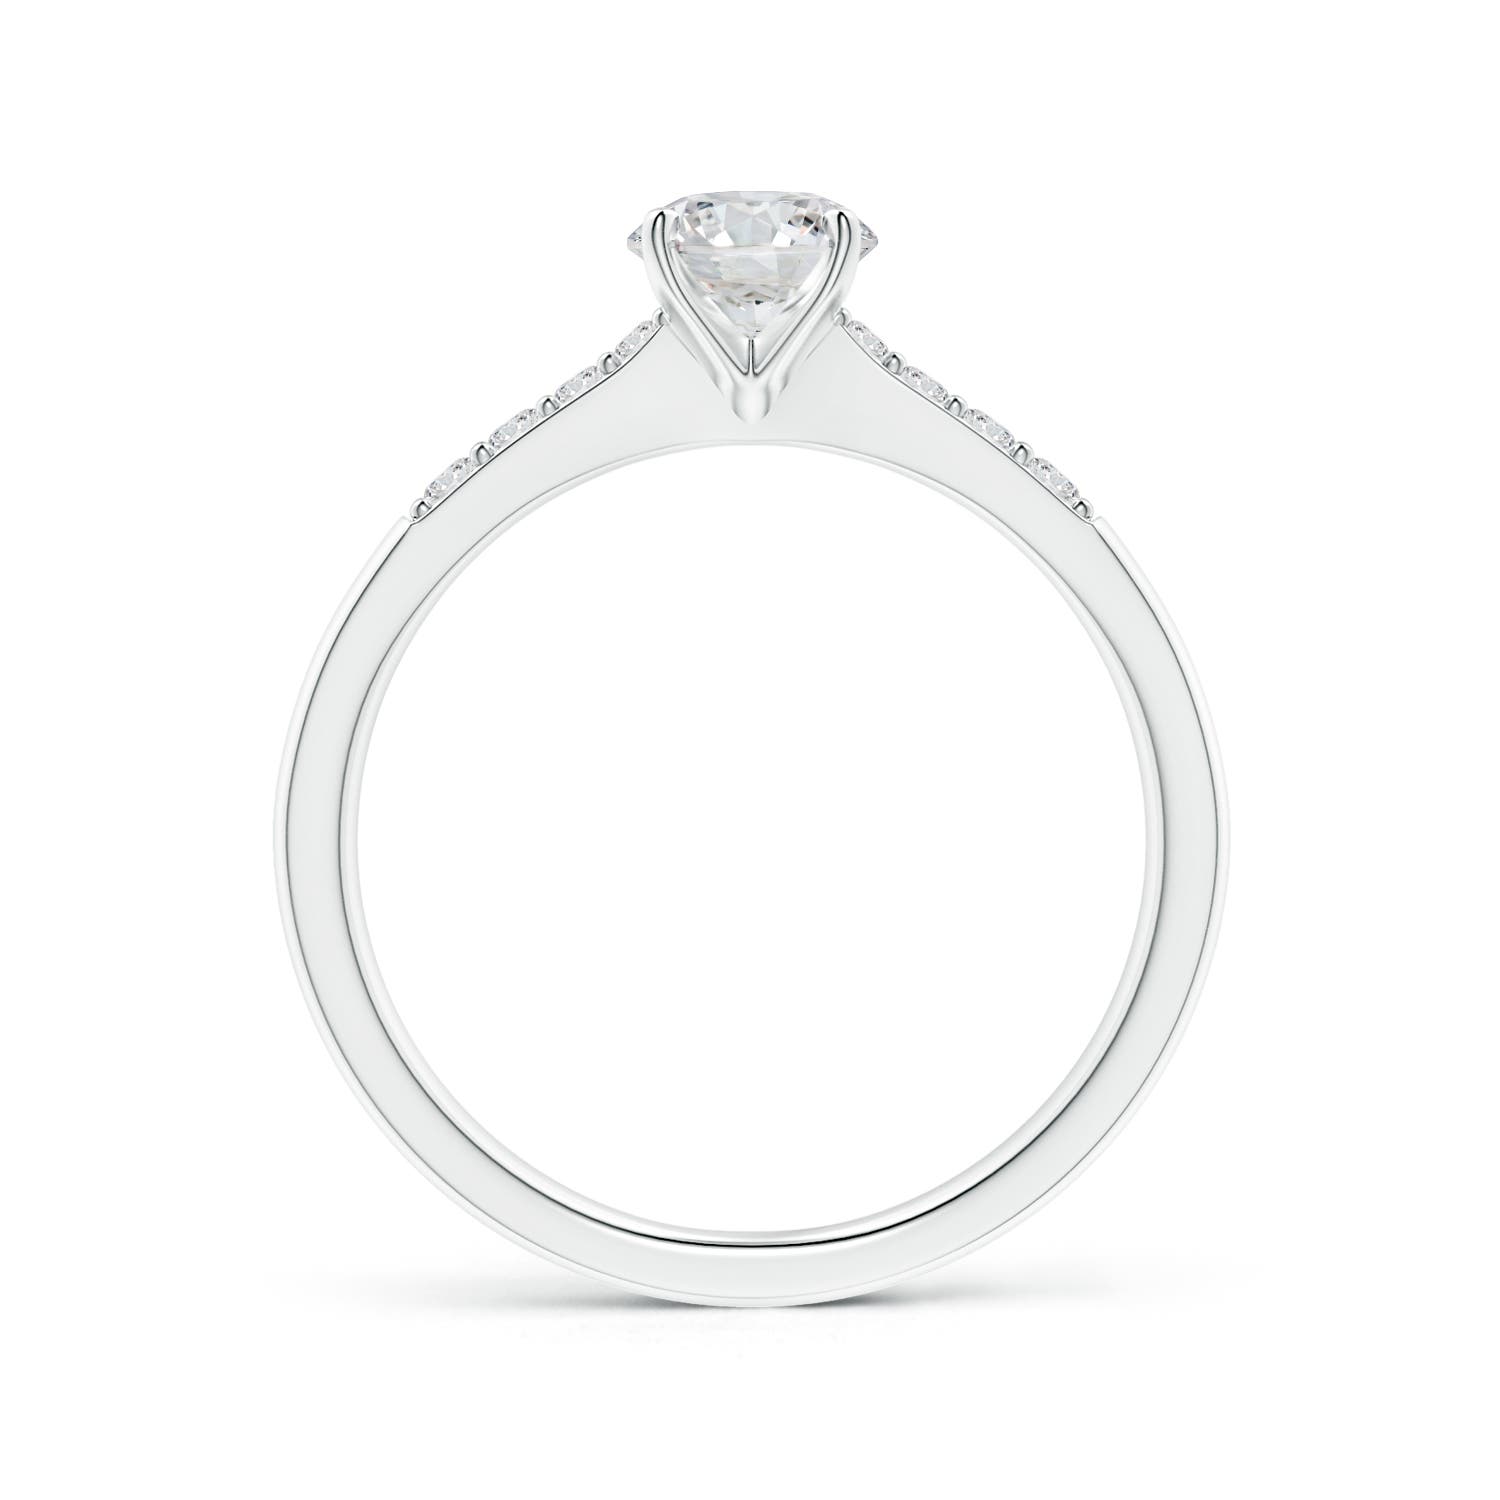 H, SI2 / 0.78 CT / 14 KT White Gold